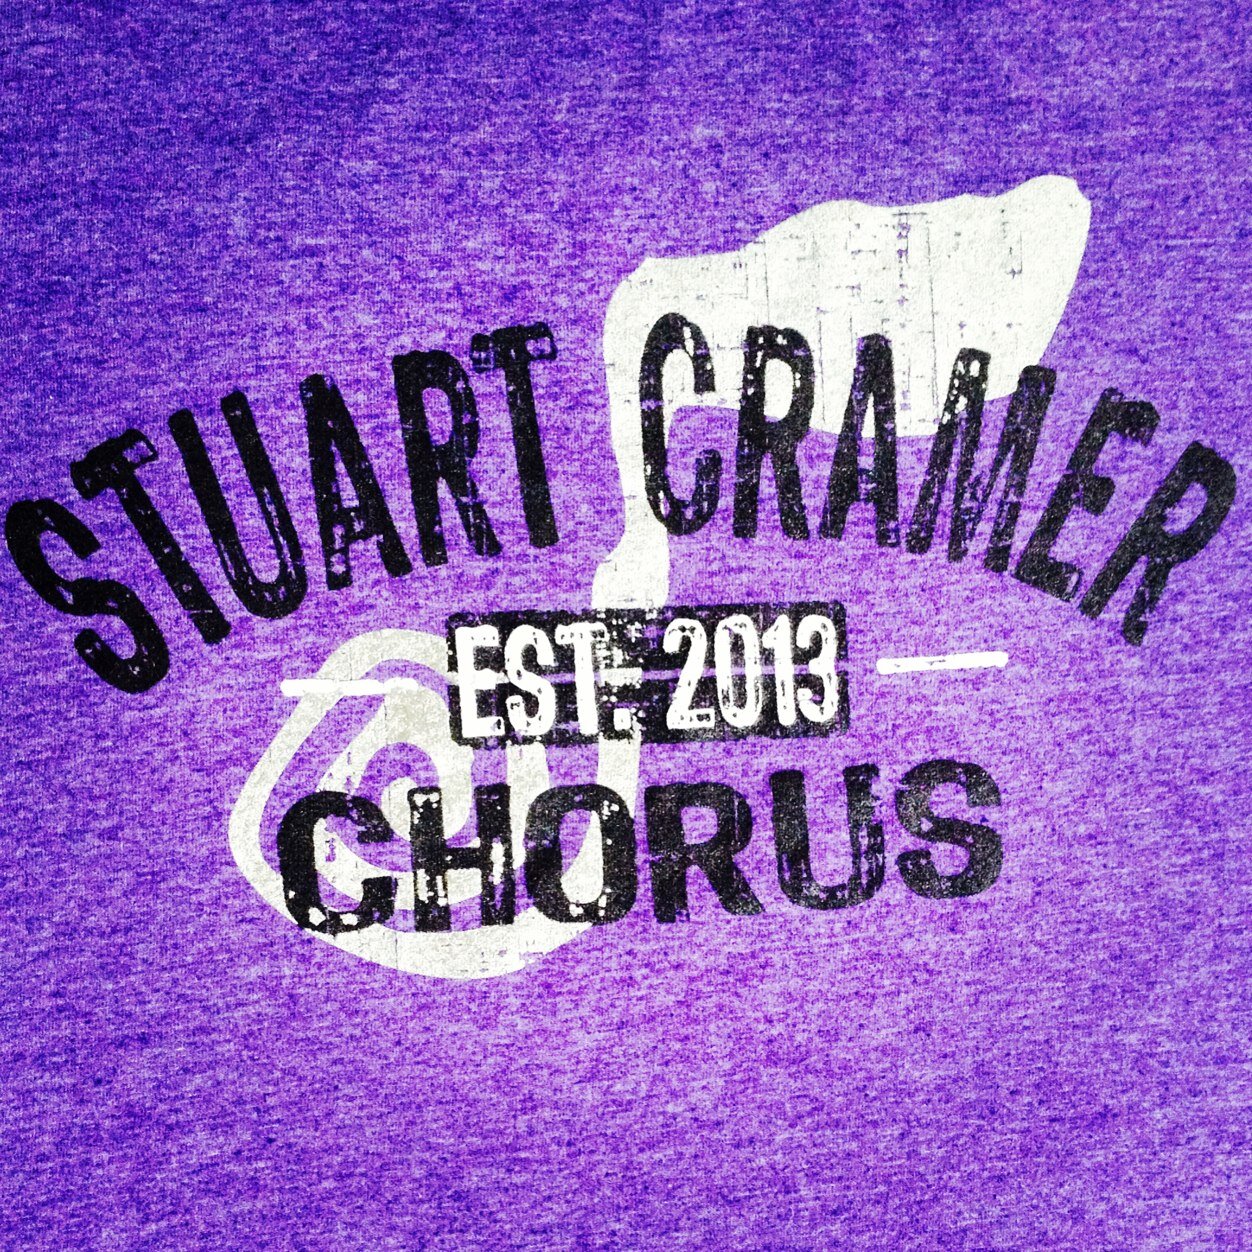 Communication tool for Stuart Cramer High School Choral Arts Department. Any misconduct on or regarding this account will be handled as a school matter.